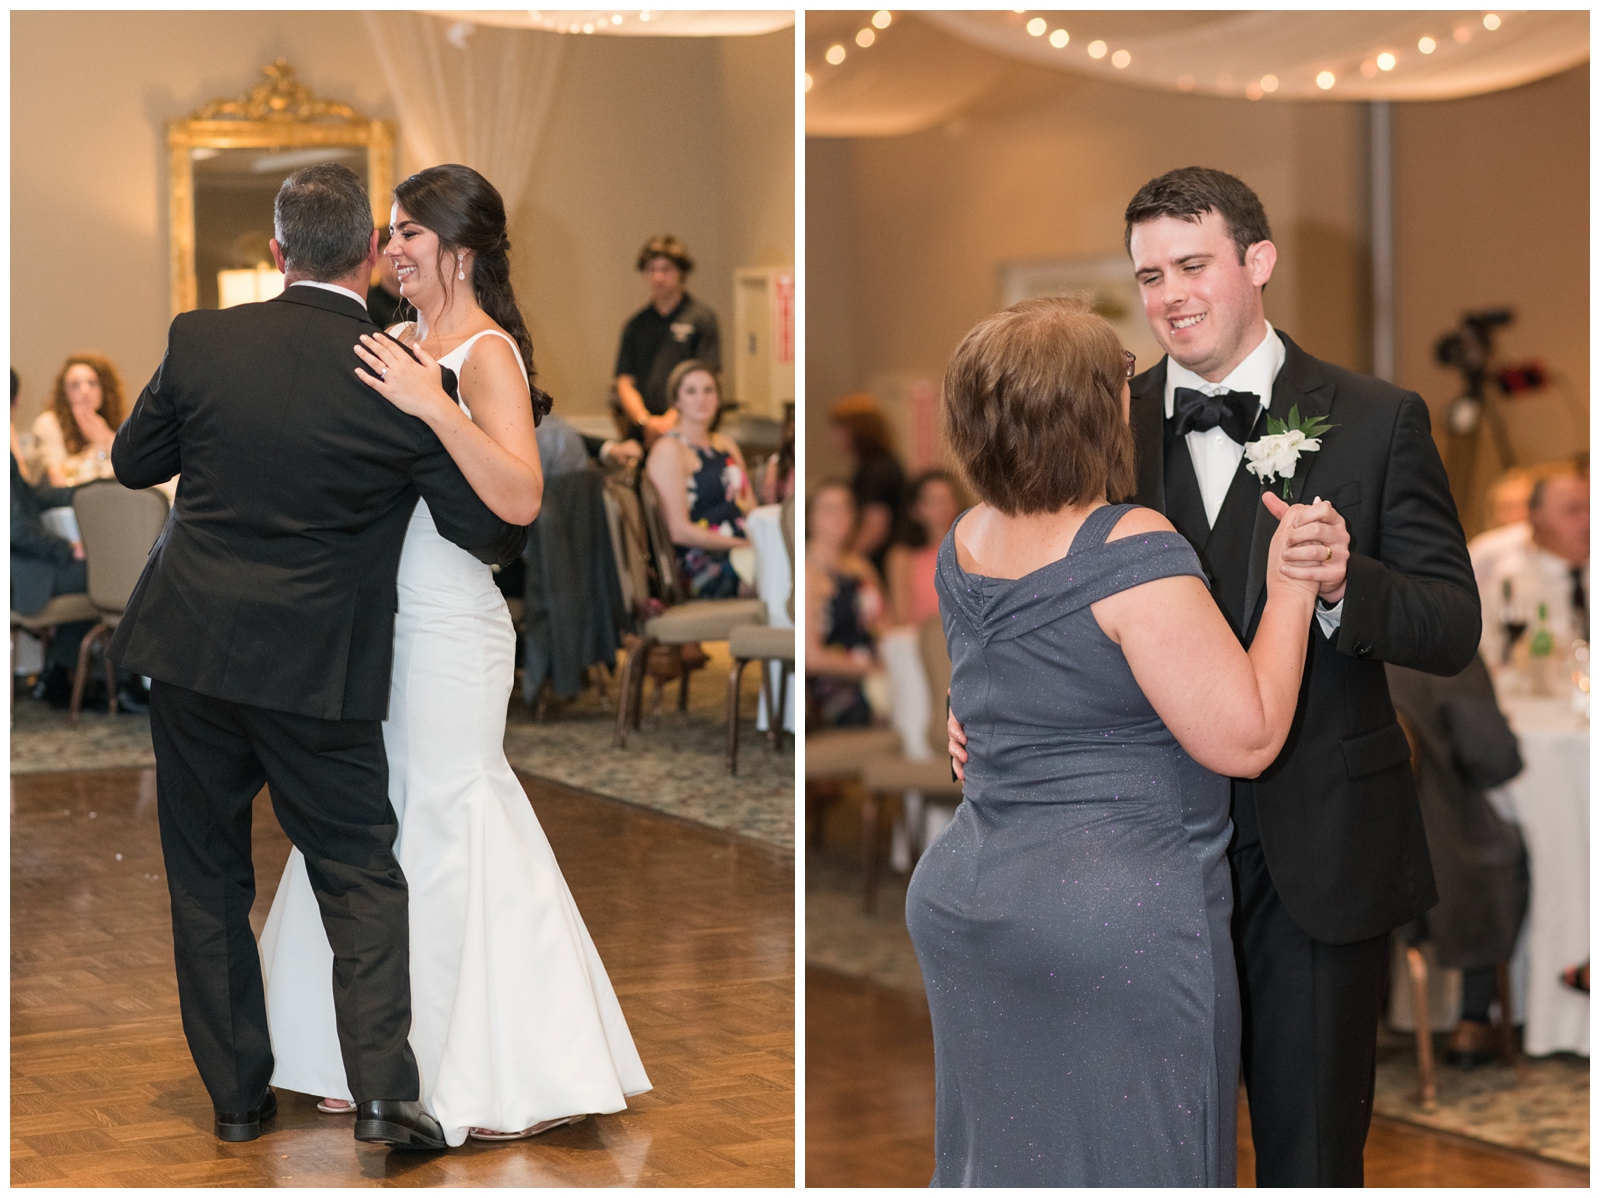 bride dances with dad and groom dances with mother during wedding reception in ohio